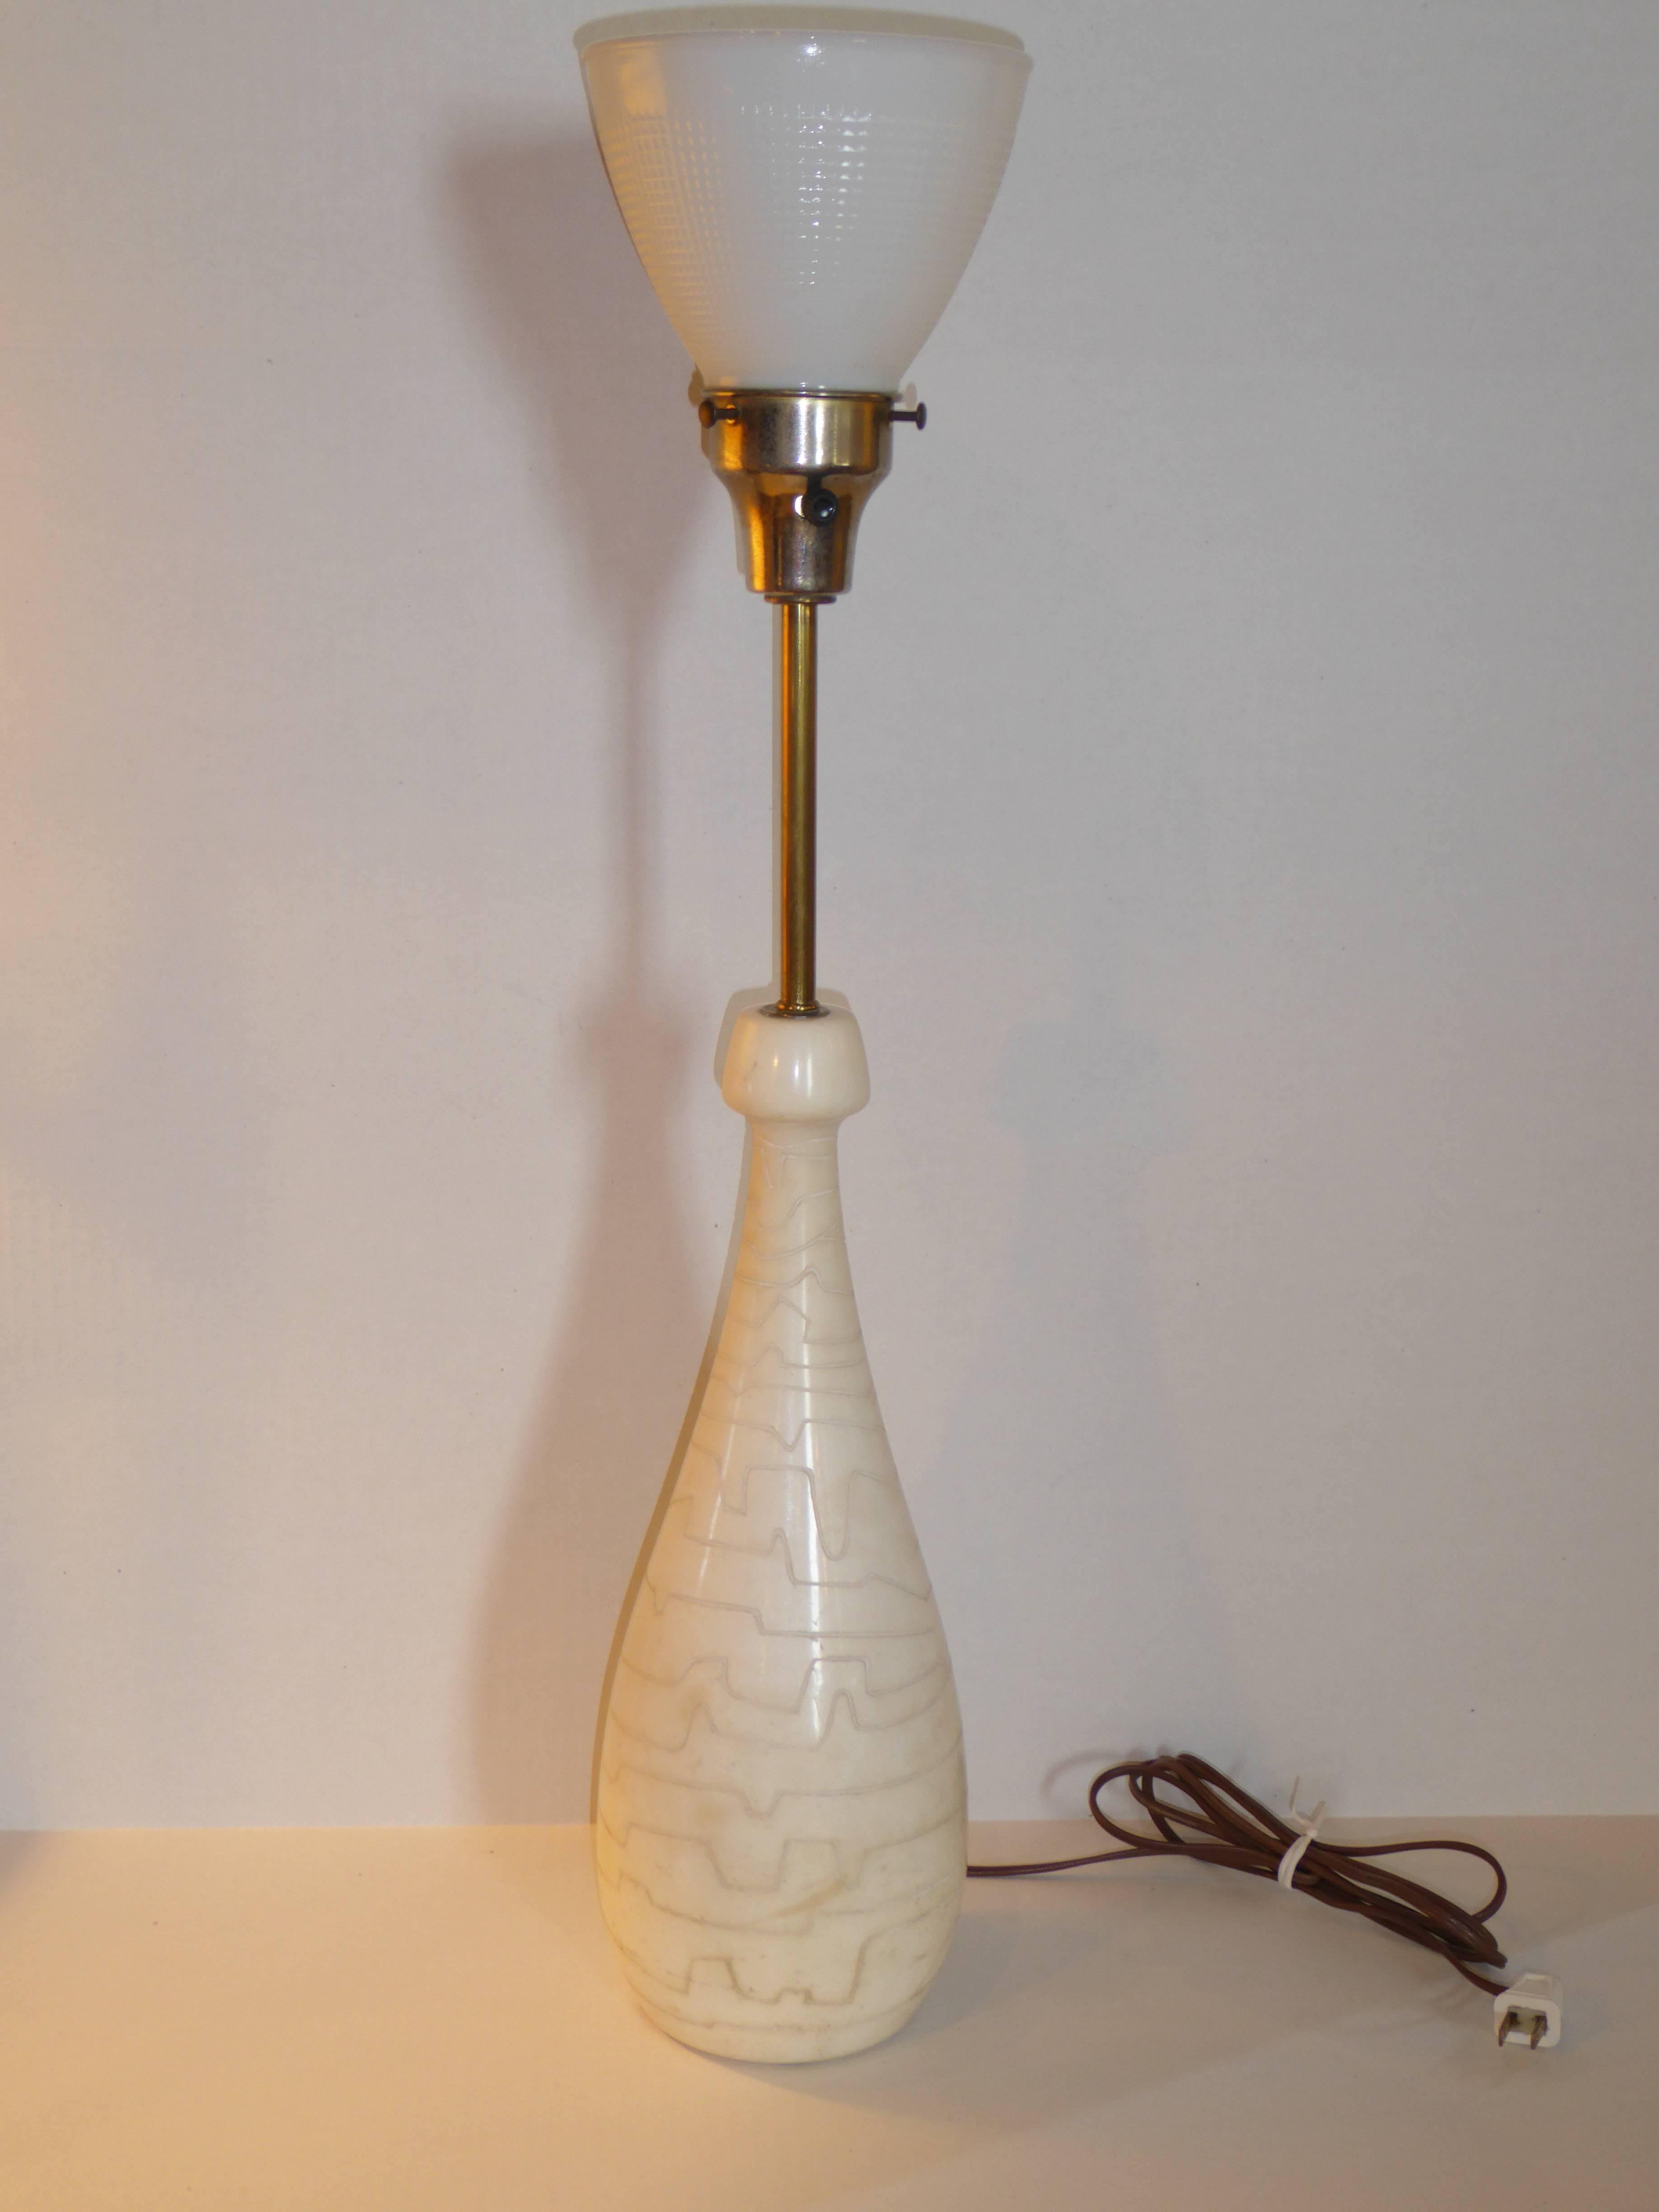 Beautifully formed teardrop bottle shaped marble table lamp with etched squiggly lines around the body. With a brass stem rising to a milk glass diffuser. Solid marble. Just add your shade. Shade shown as example.
Raymor label inside socket